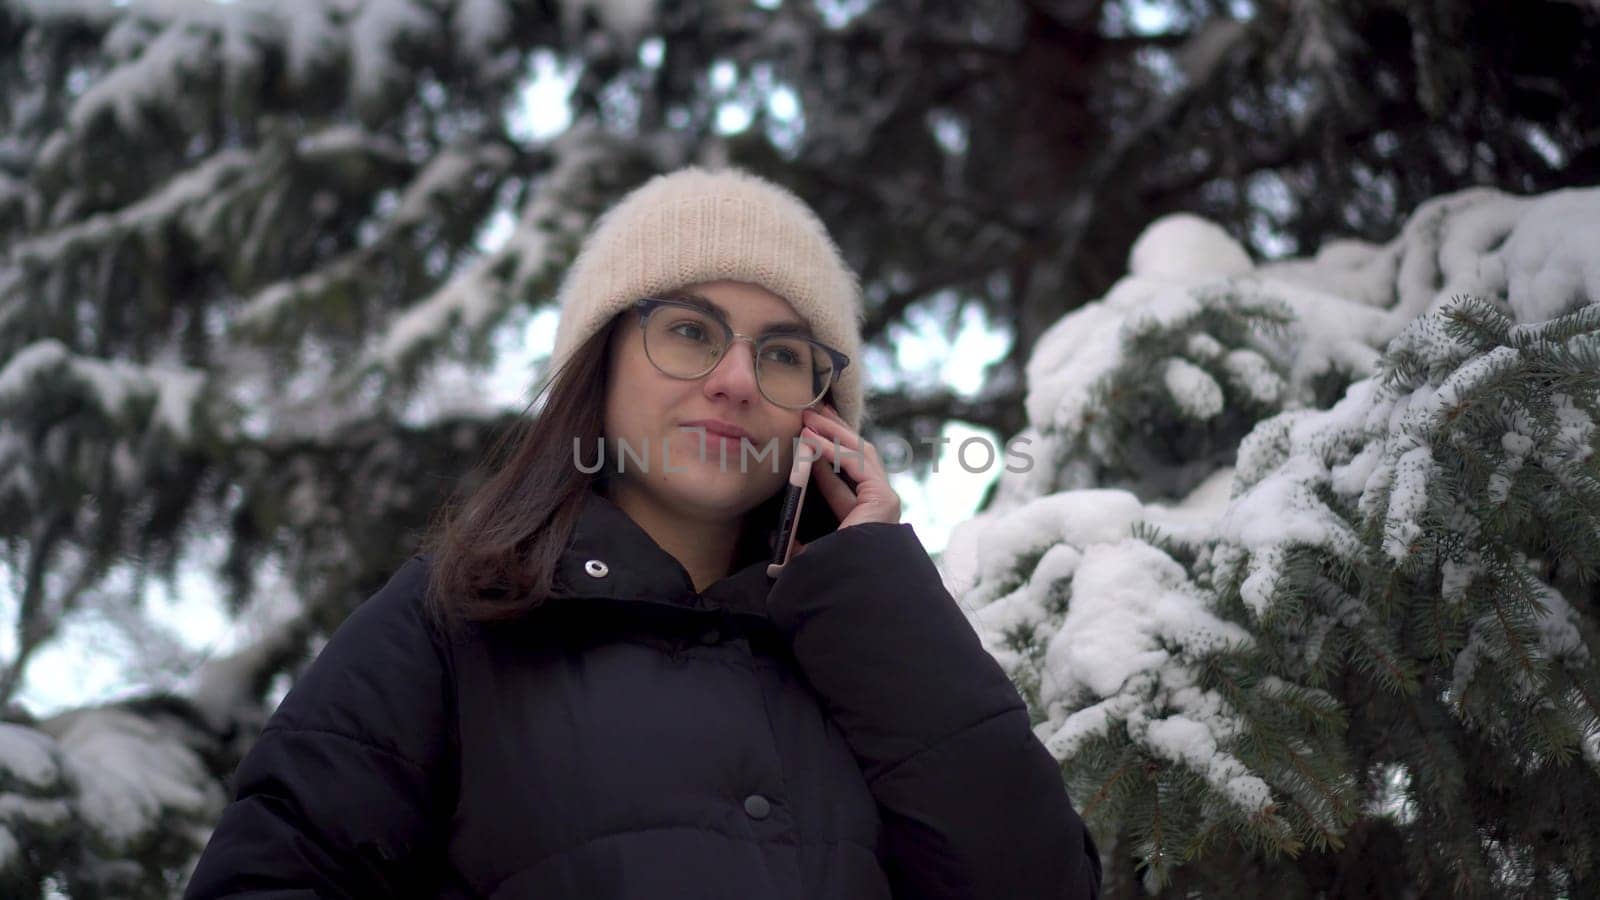 A young woman speaks on the phone near a tall spruce tree in winter. A girl with glasses communicates via cell phone against the backdrop of snowy spruce branches. 4k